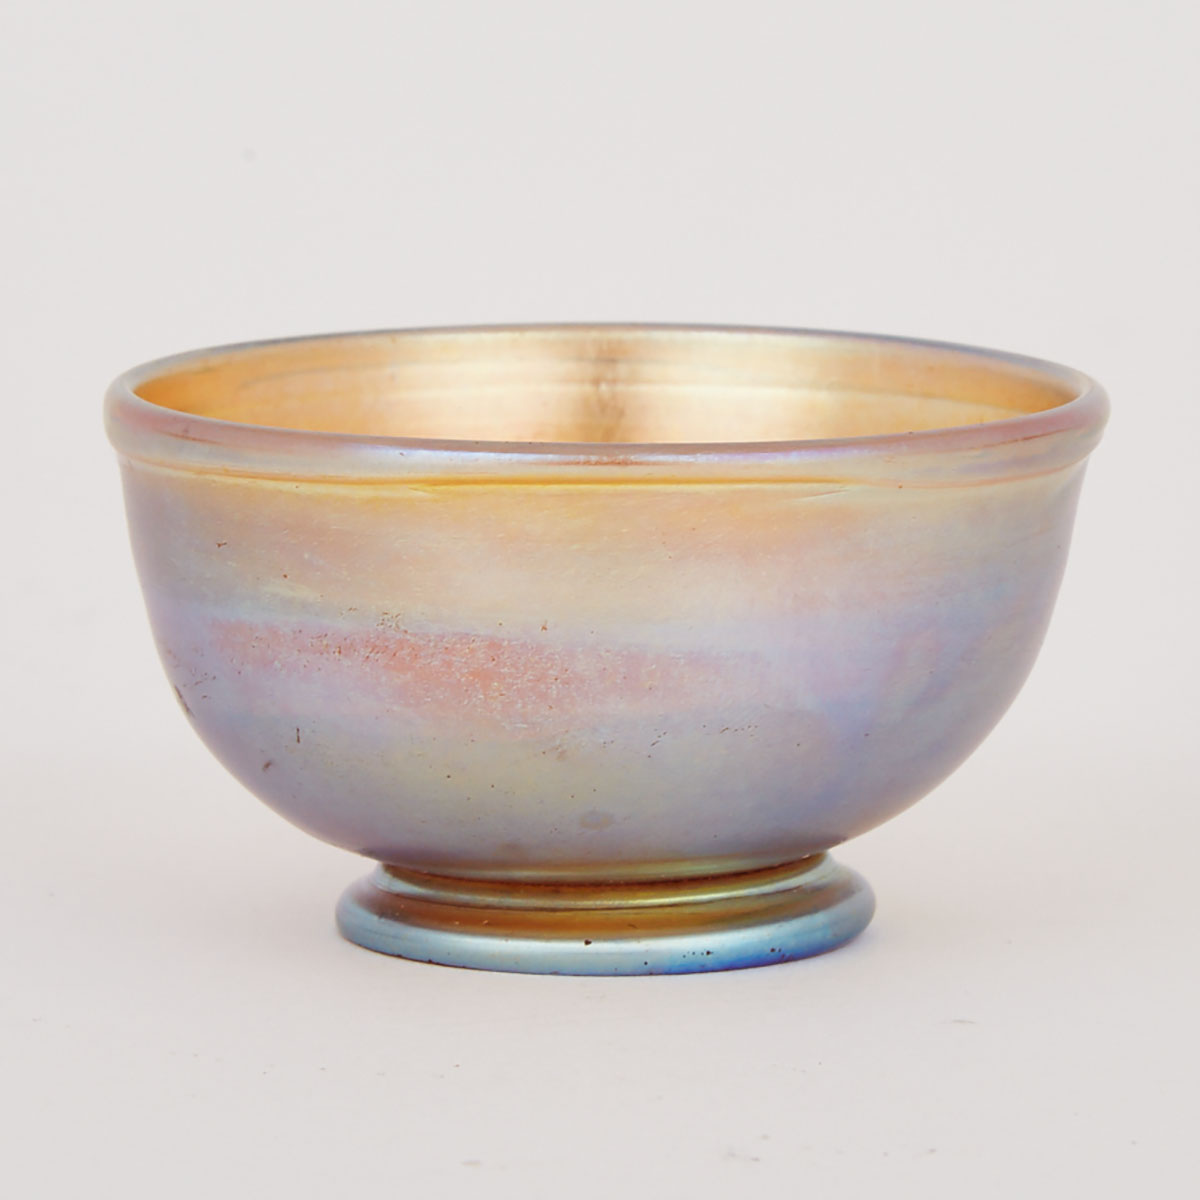 Tiffany ‘Favrile’ Iridescent Small Glass Bowl, early 20th century